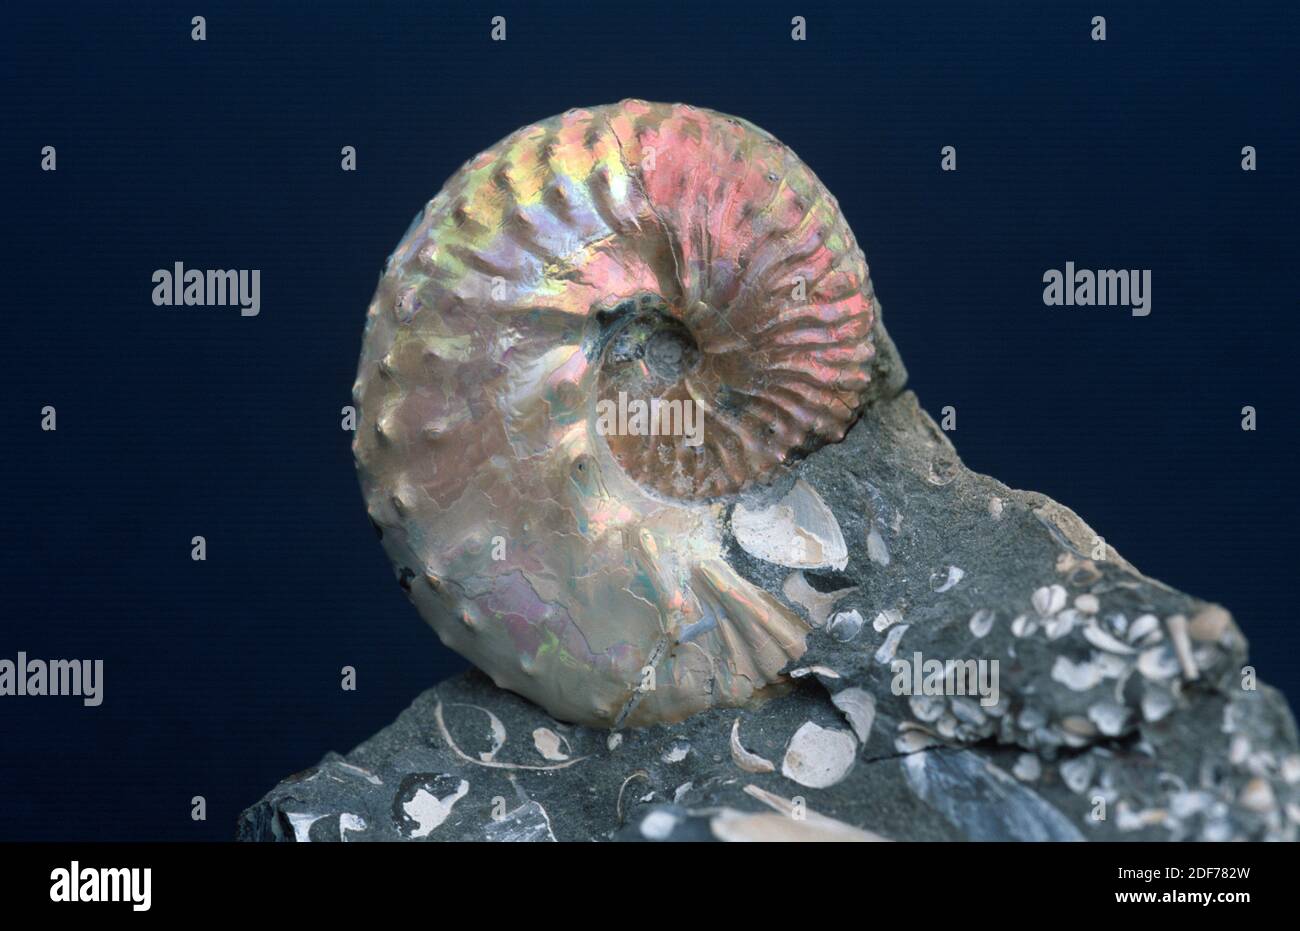 Ammonites fossil (Discoscaphites gulosus) with nacre. This extinct marine animal are cephalopoda and they lived during the Cretaceous. Stock Photo